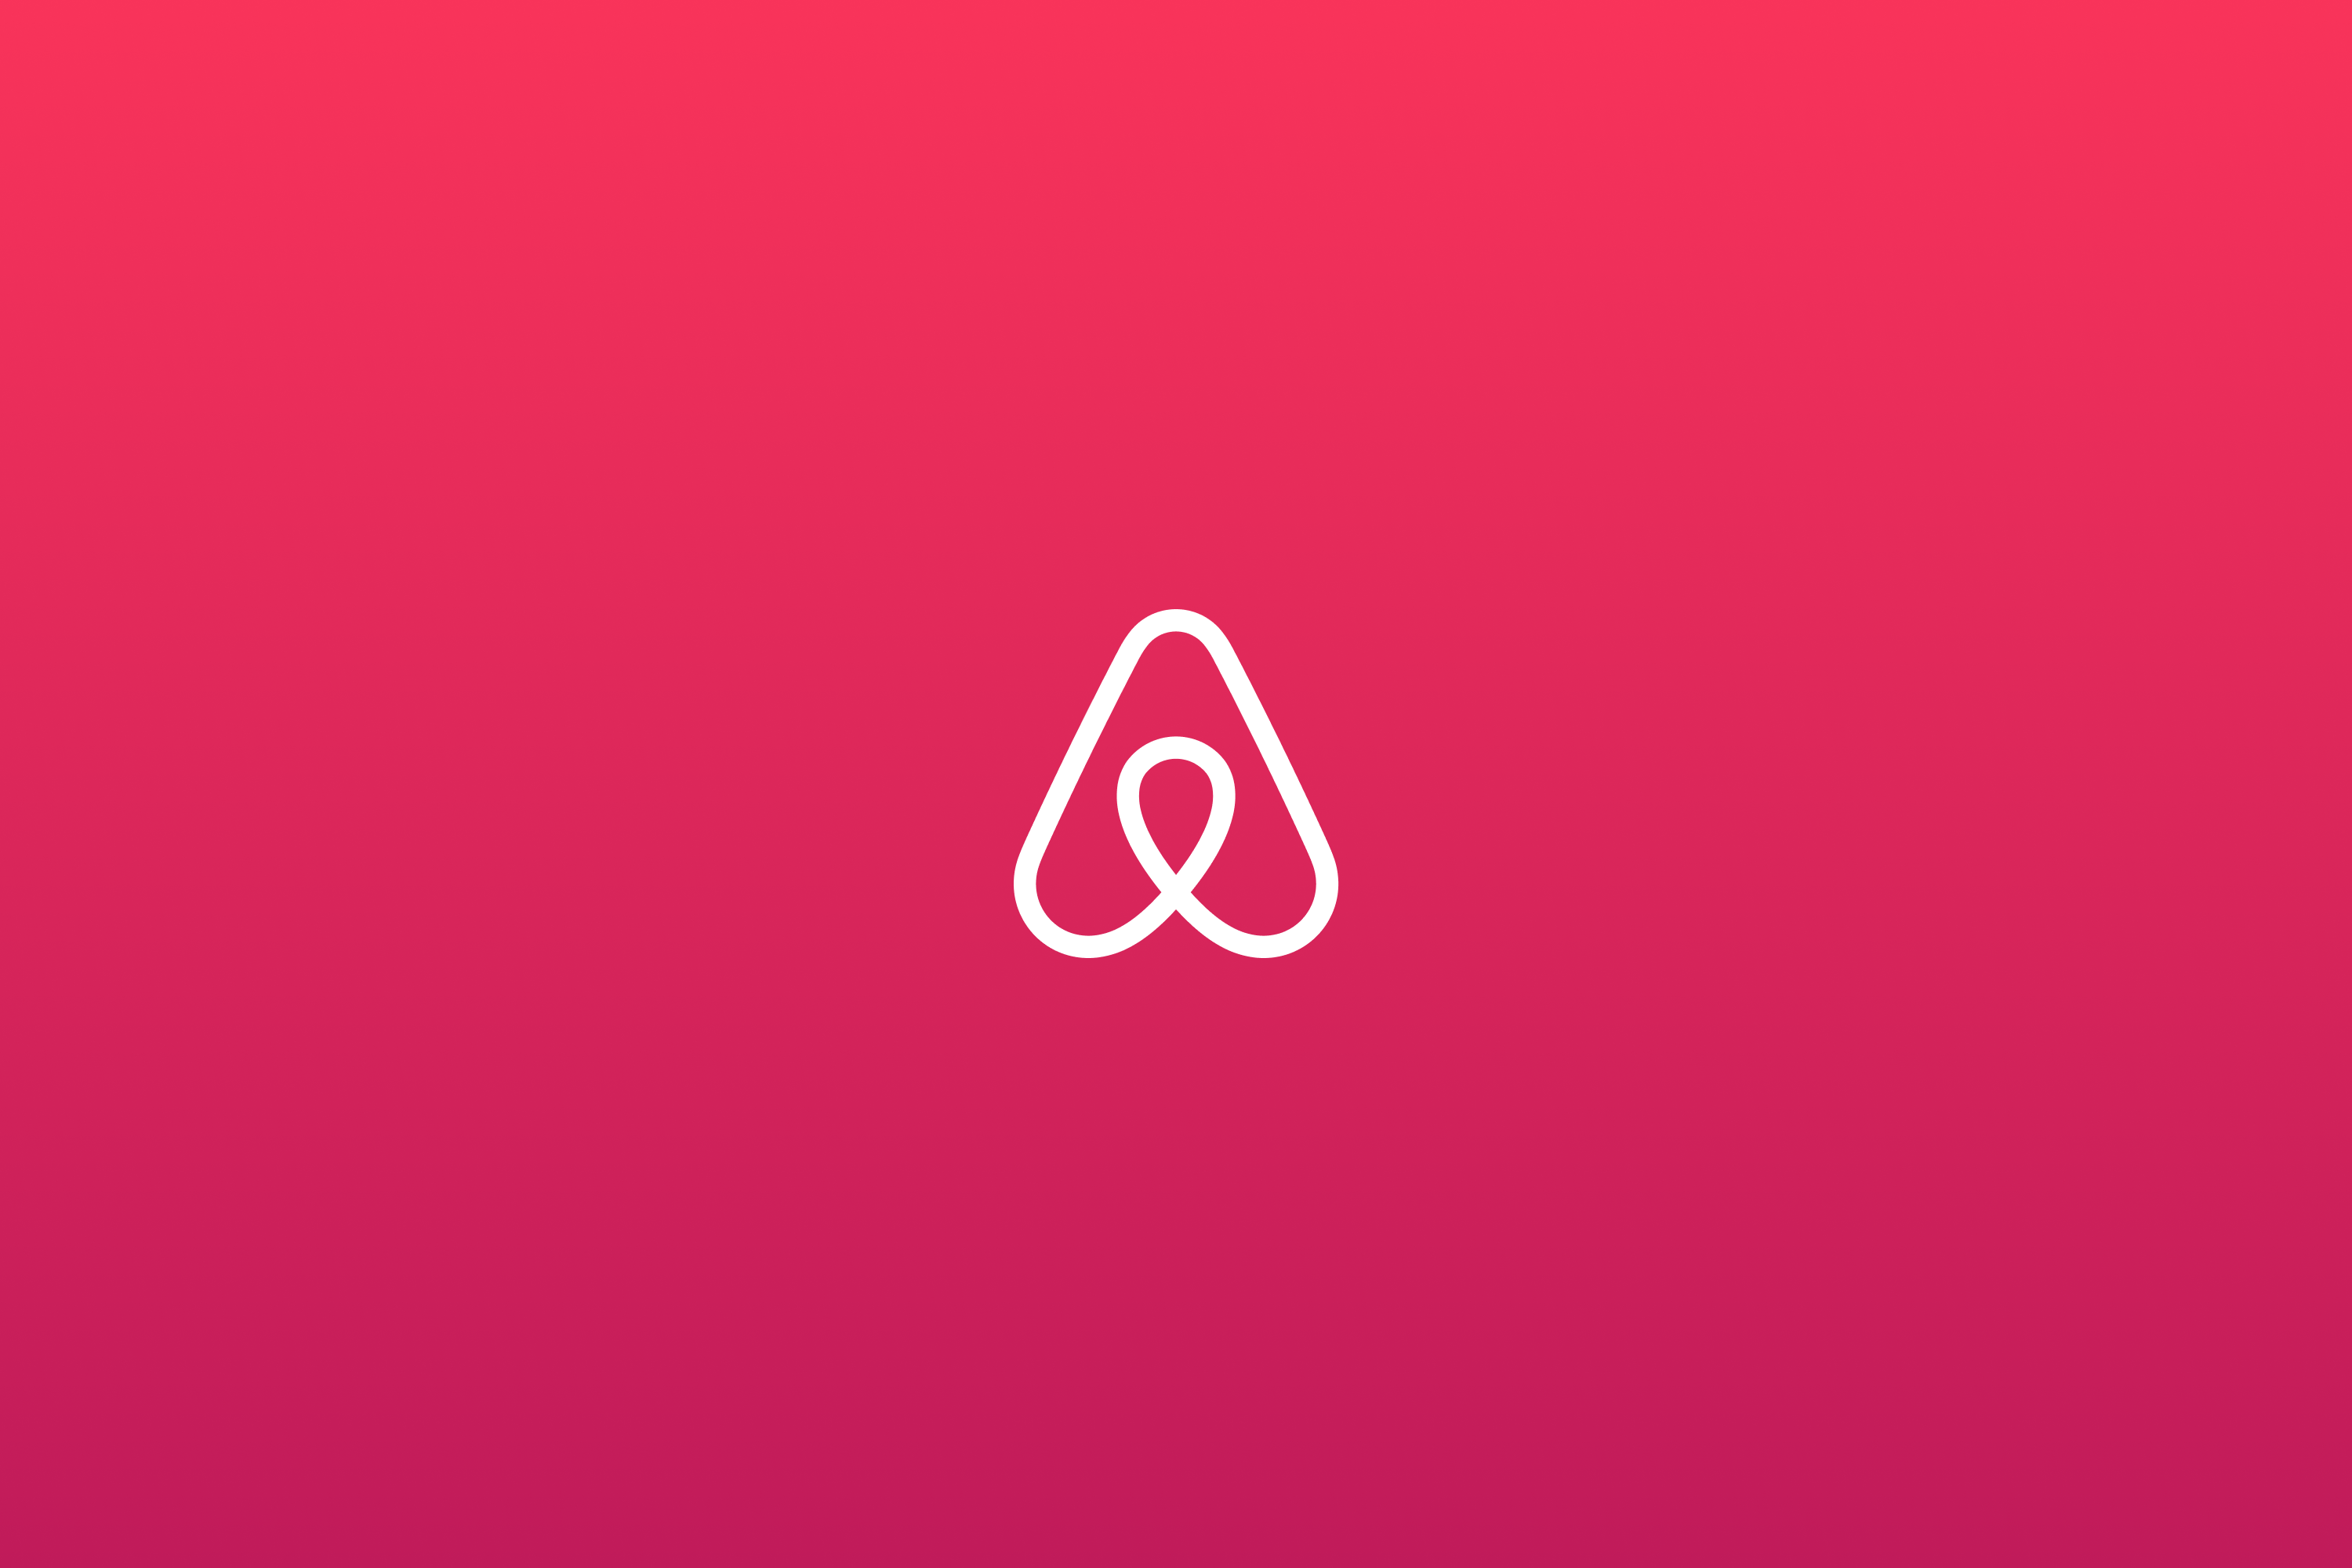 Airbnb has recorded positive earnings despite the pandemic in 2021. www.theexchange.africa